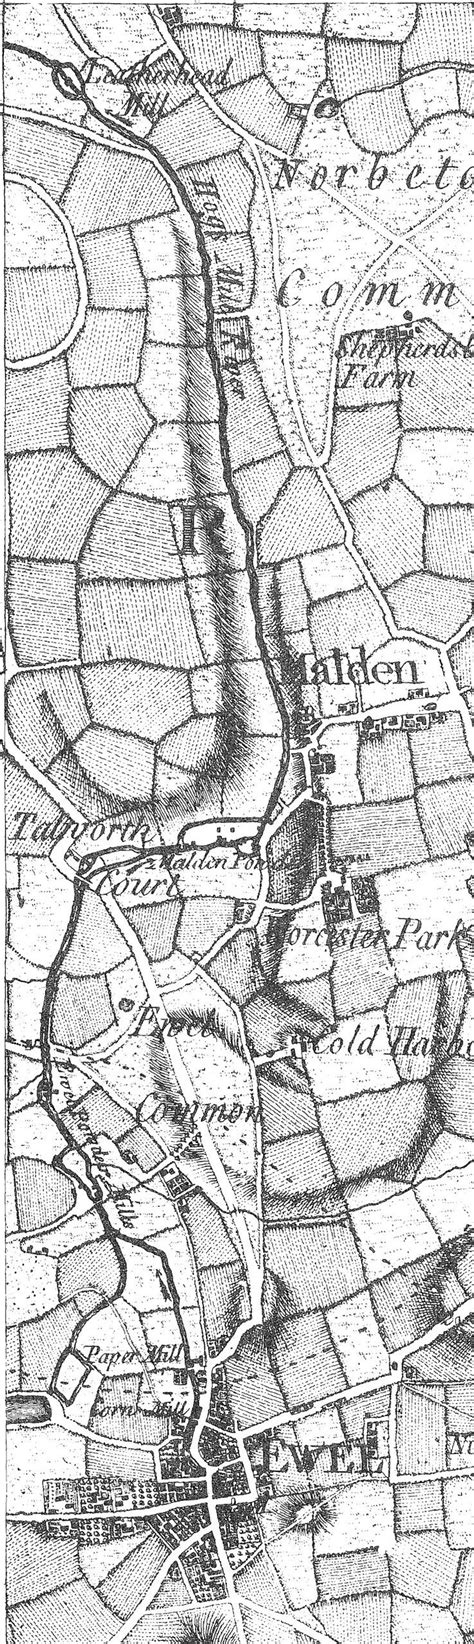 An Extract From The Rocque 1768 Map Click On Image To Enlarge Light